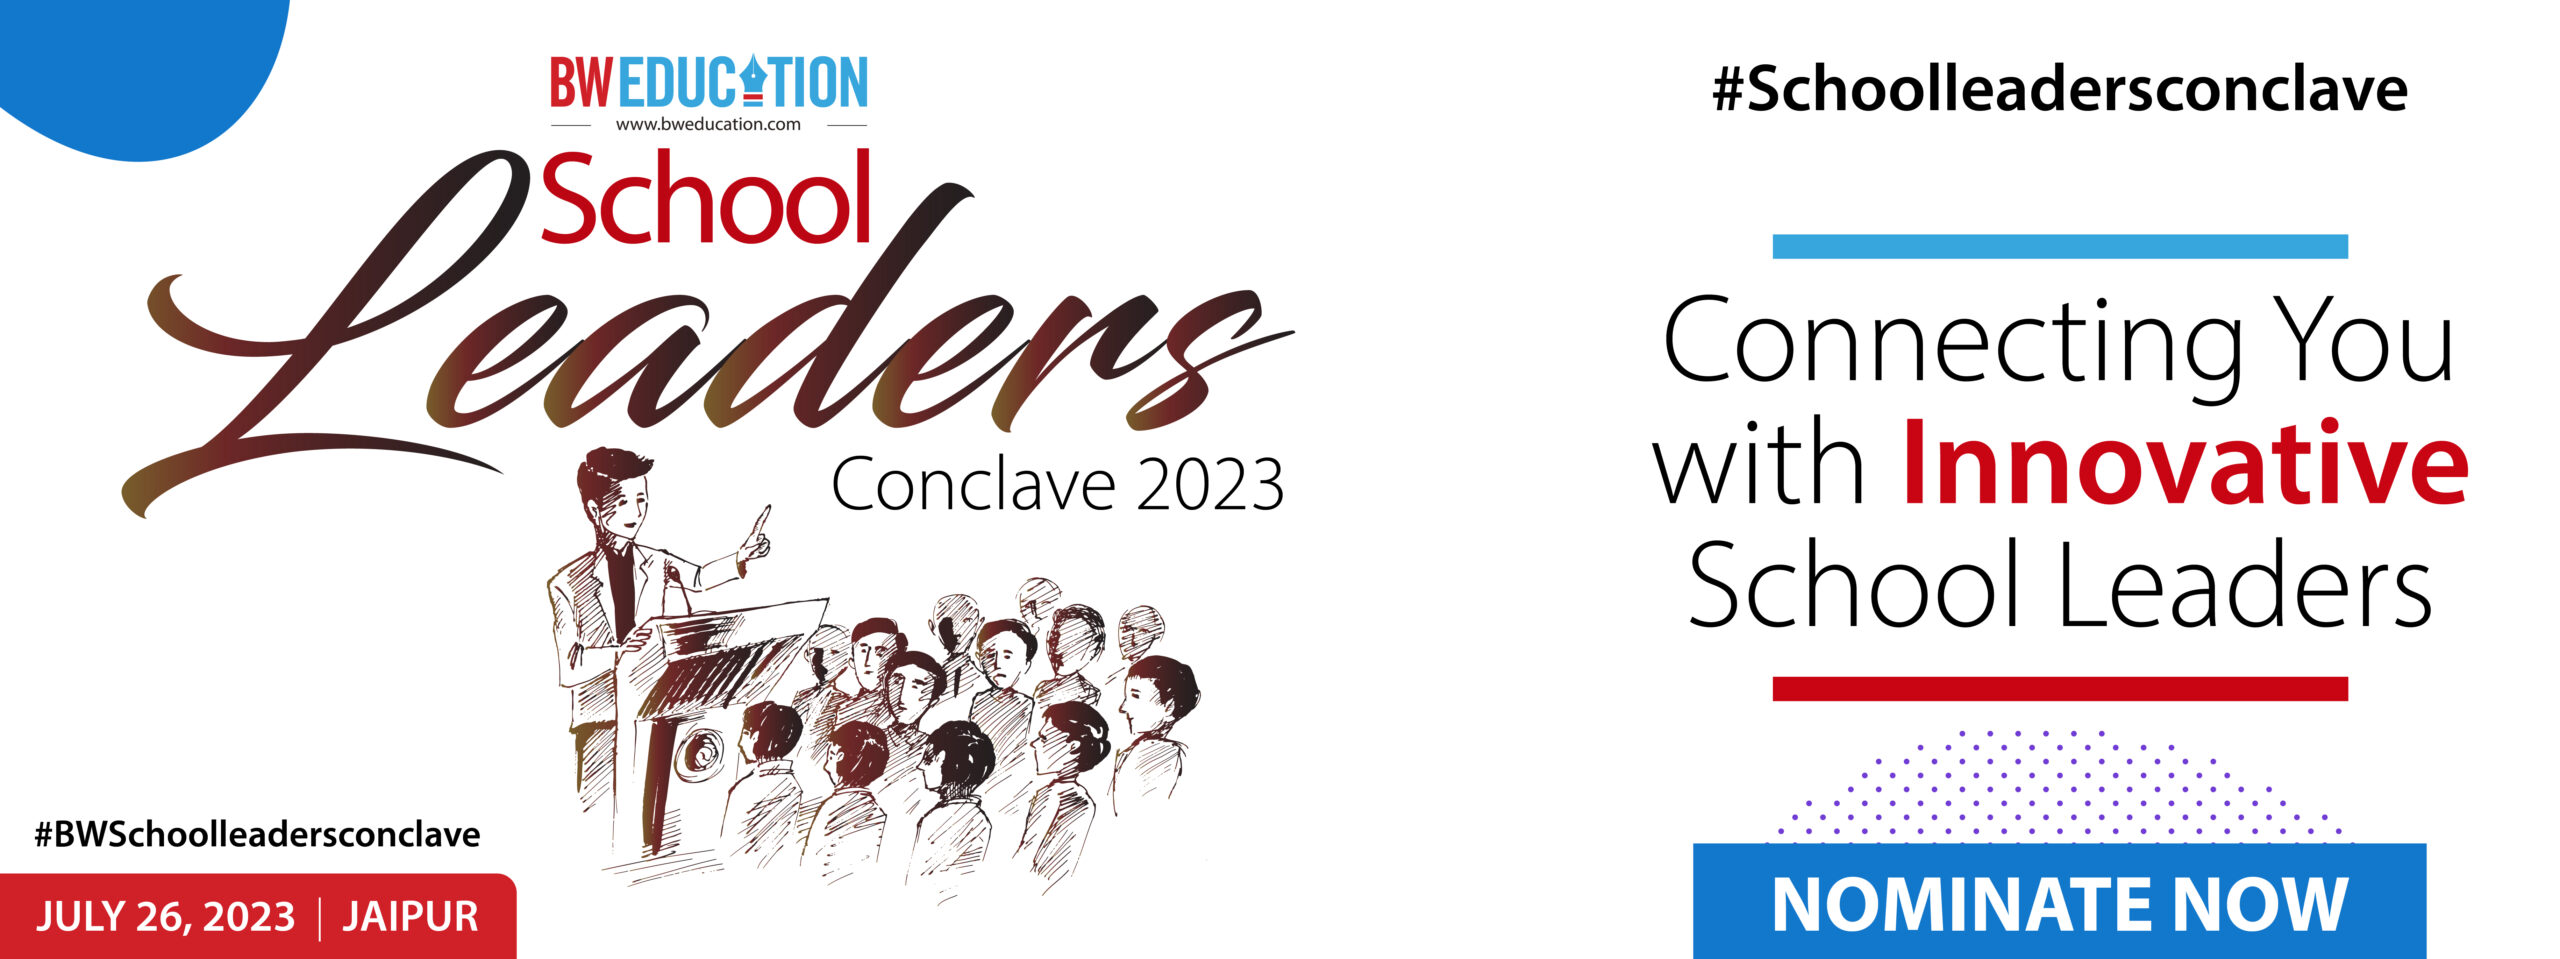 ABOUT THE SCHOOL LEADERS CONCLAVE 2023